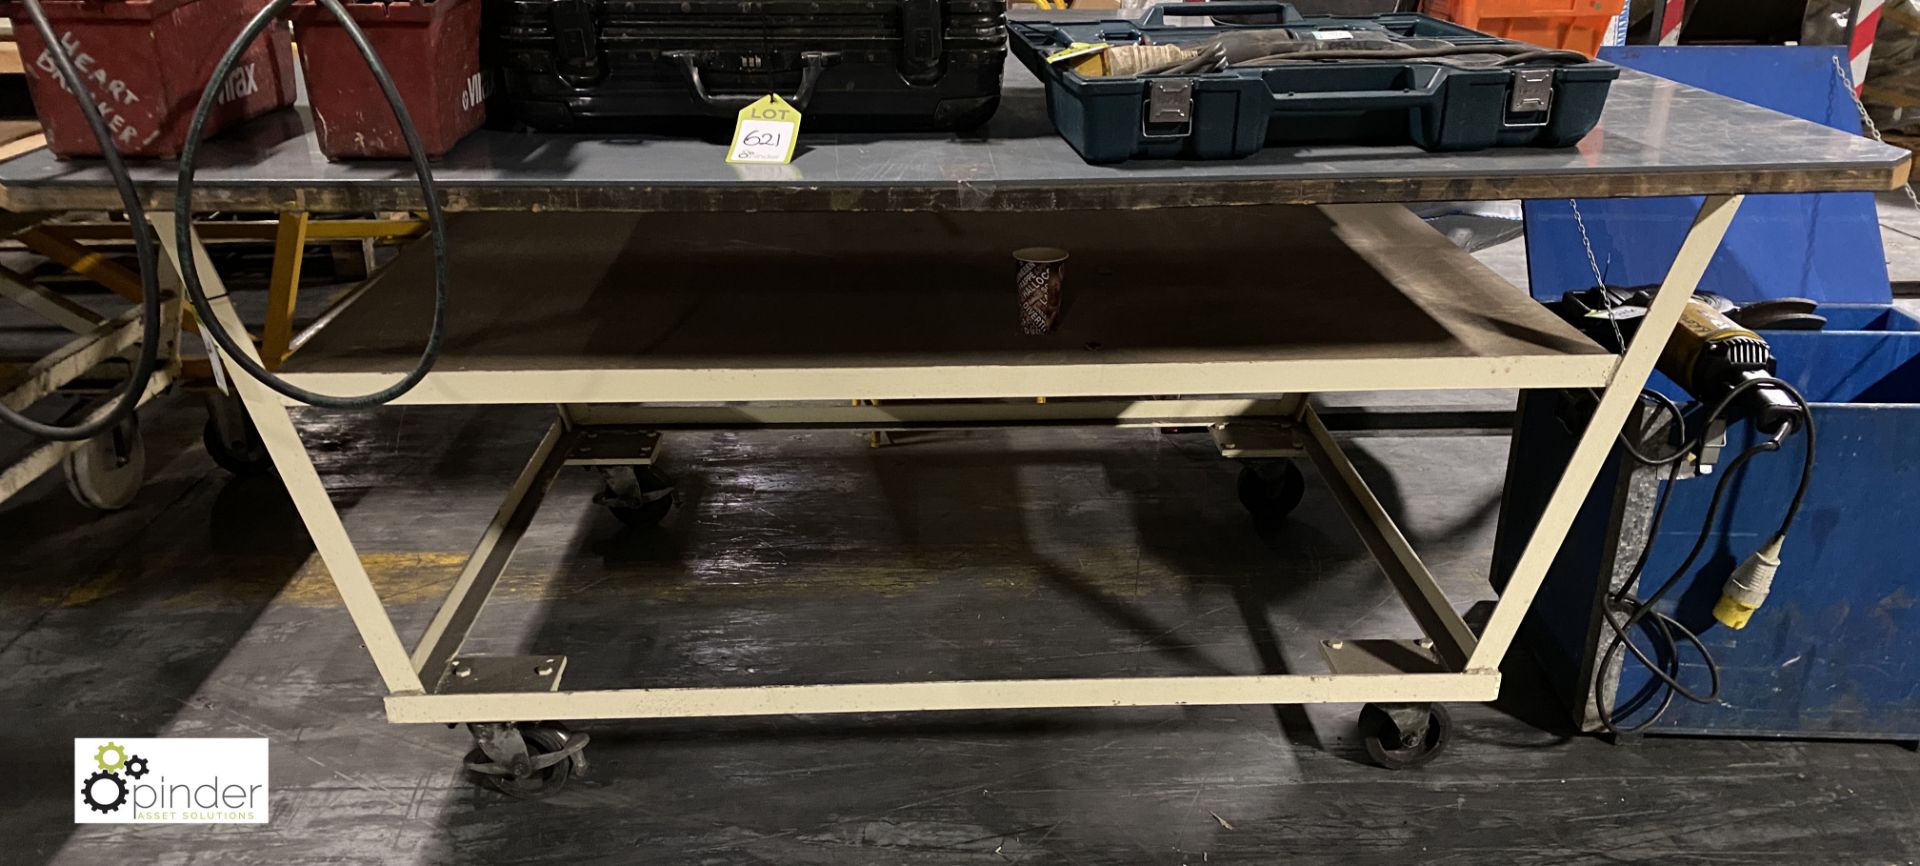 Steel fabricated mobile Workbench, 1900mm x 1500mm - Image 2 of 2